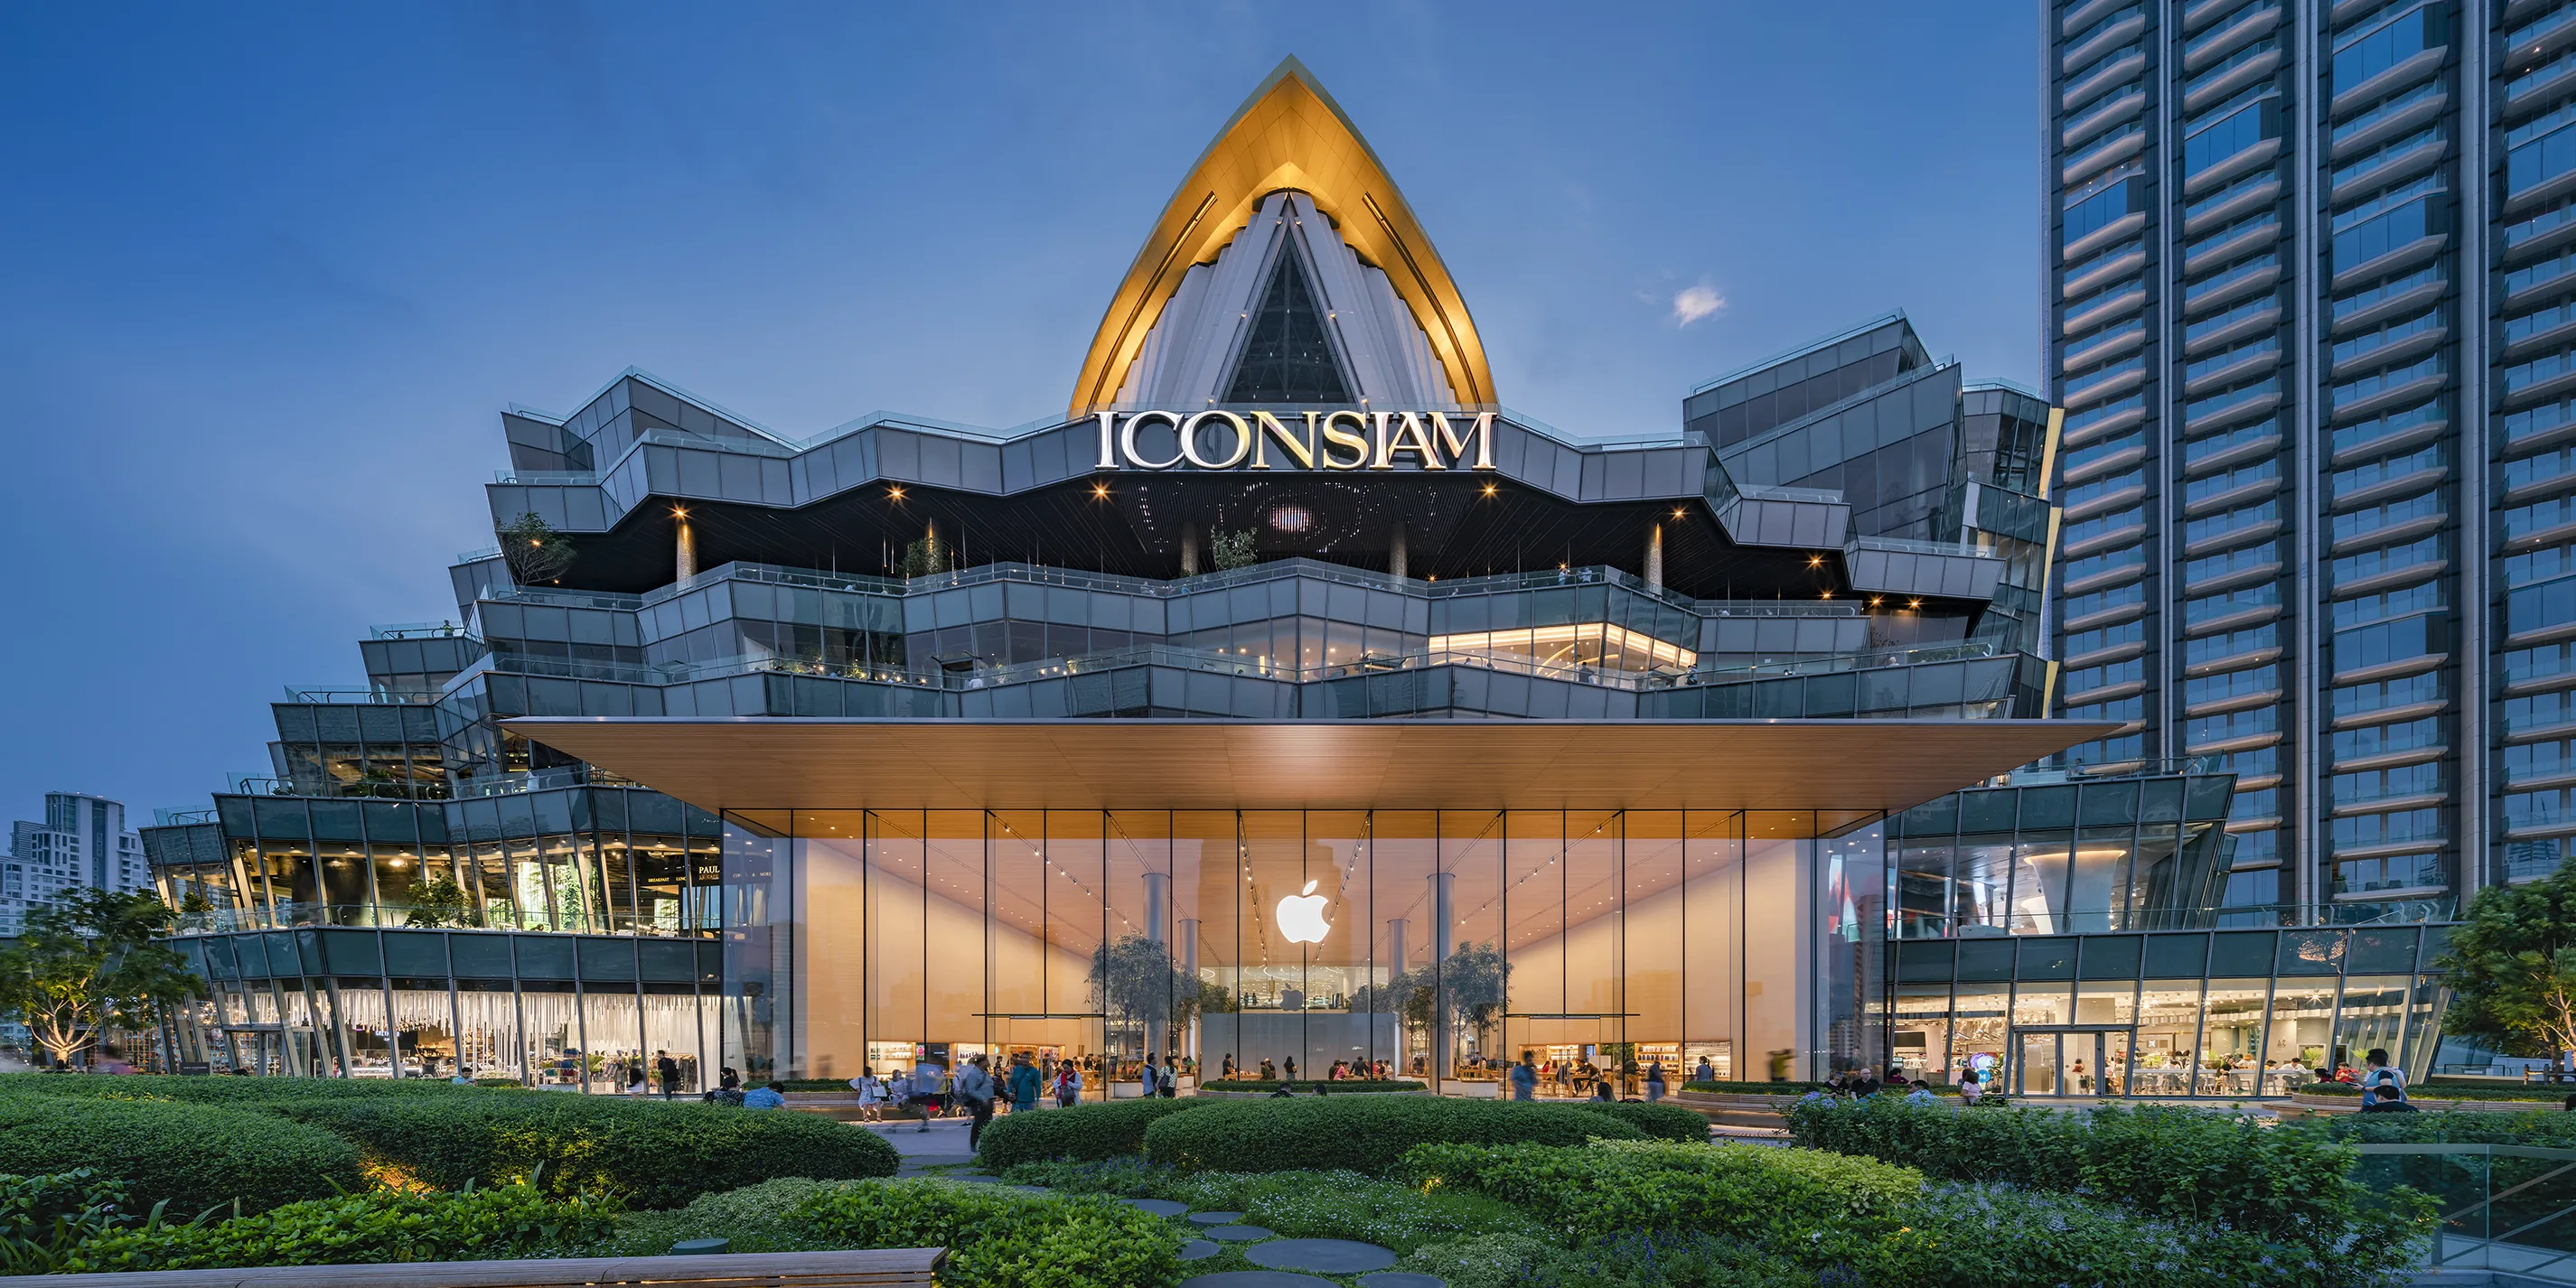 IconSiam in Thailand, central_asia | Fragrance,Shoes,Accessories,Clothes,Cosmetics - Country Helper